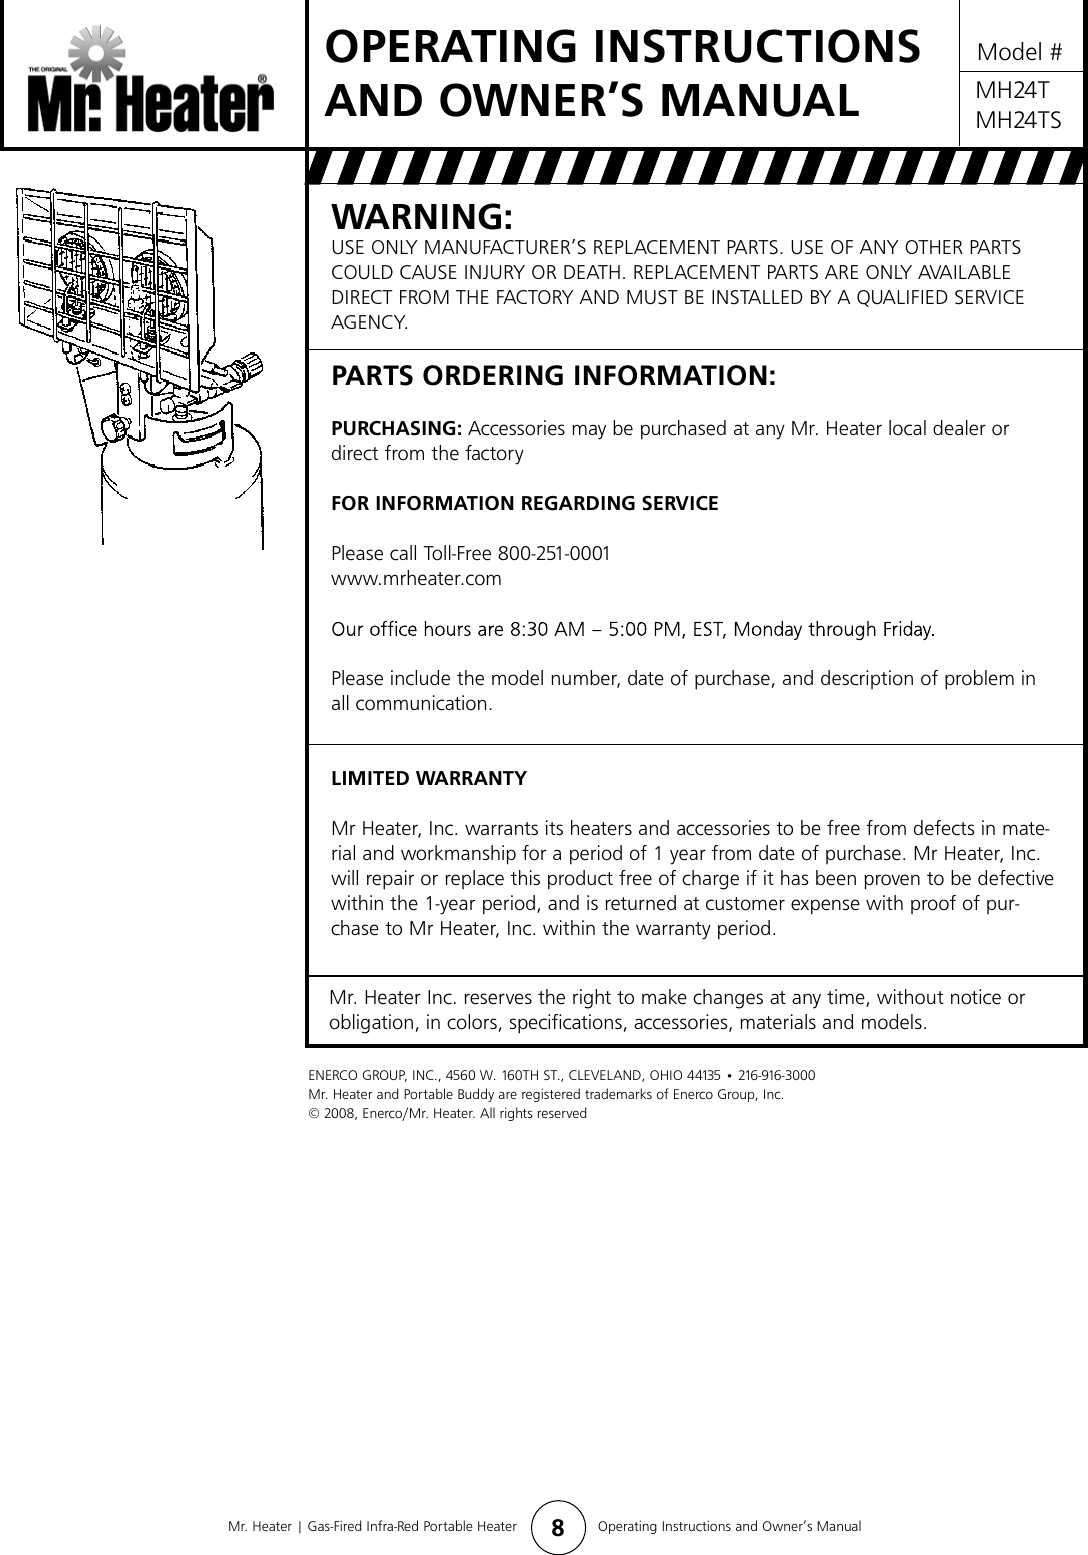 Page 8 of 8 - Mr-Heater Mr-Heater-Mh24T-Users-Manual- MH24T_US_mar_27  Mr-heater-mh24t-users-manual